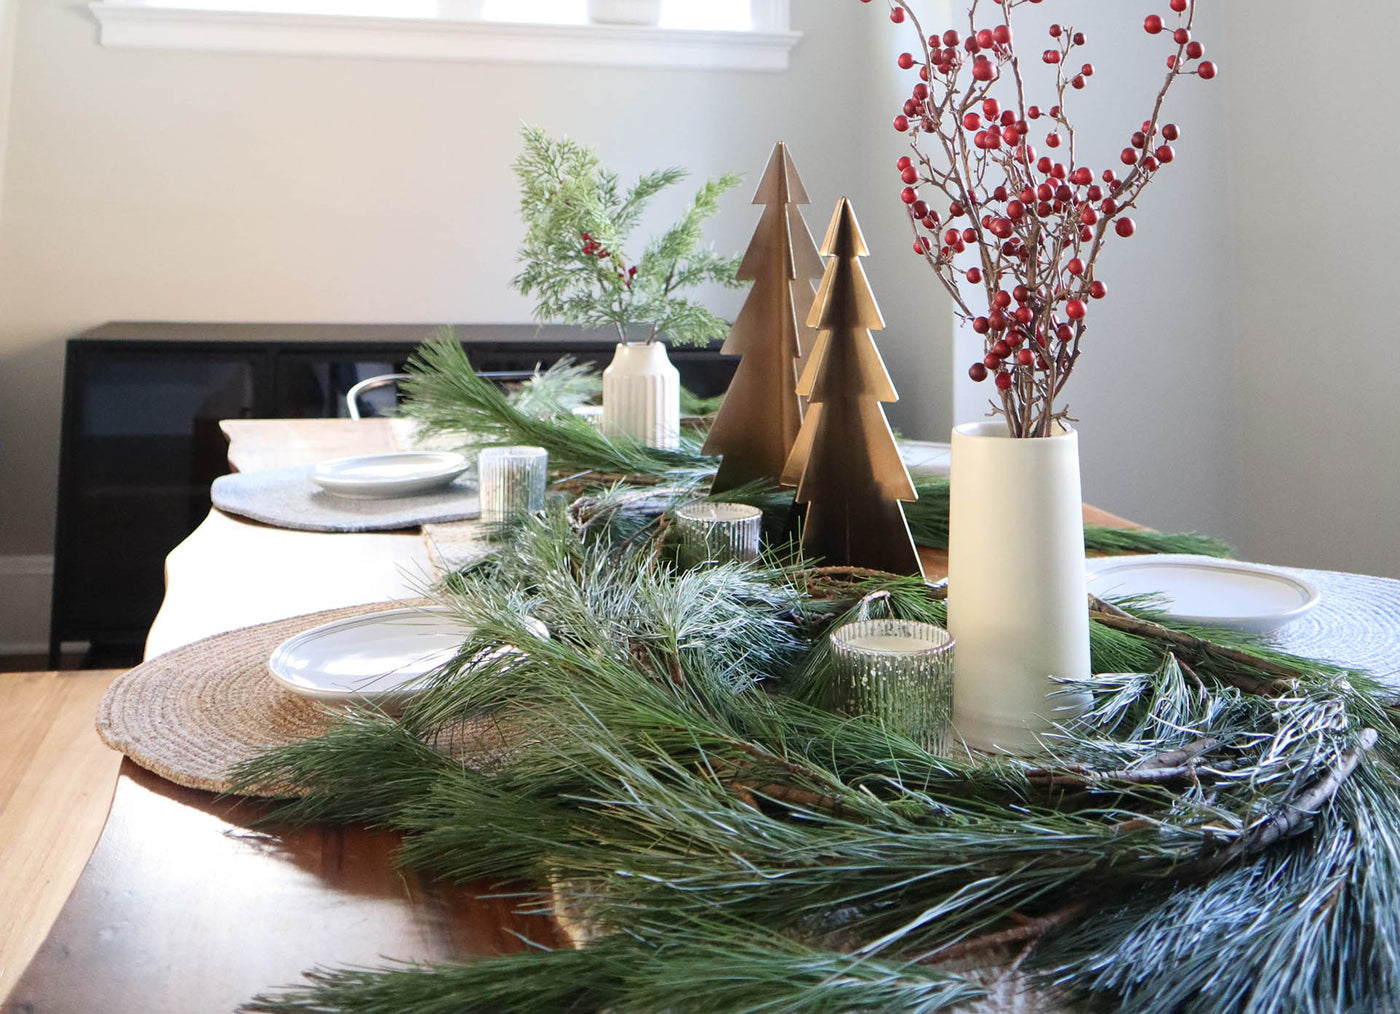 A Very Merry Table